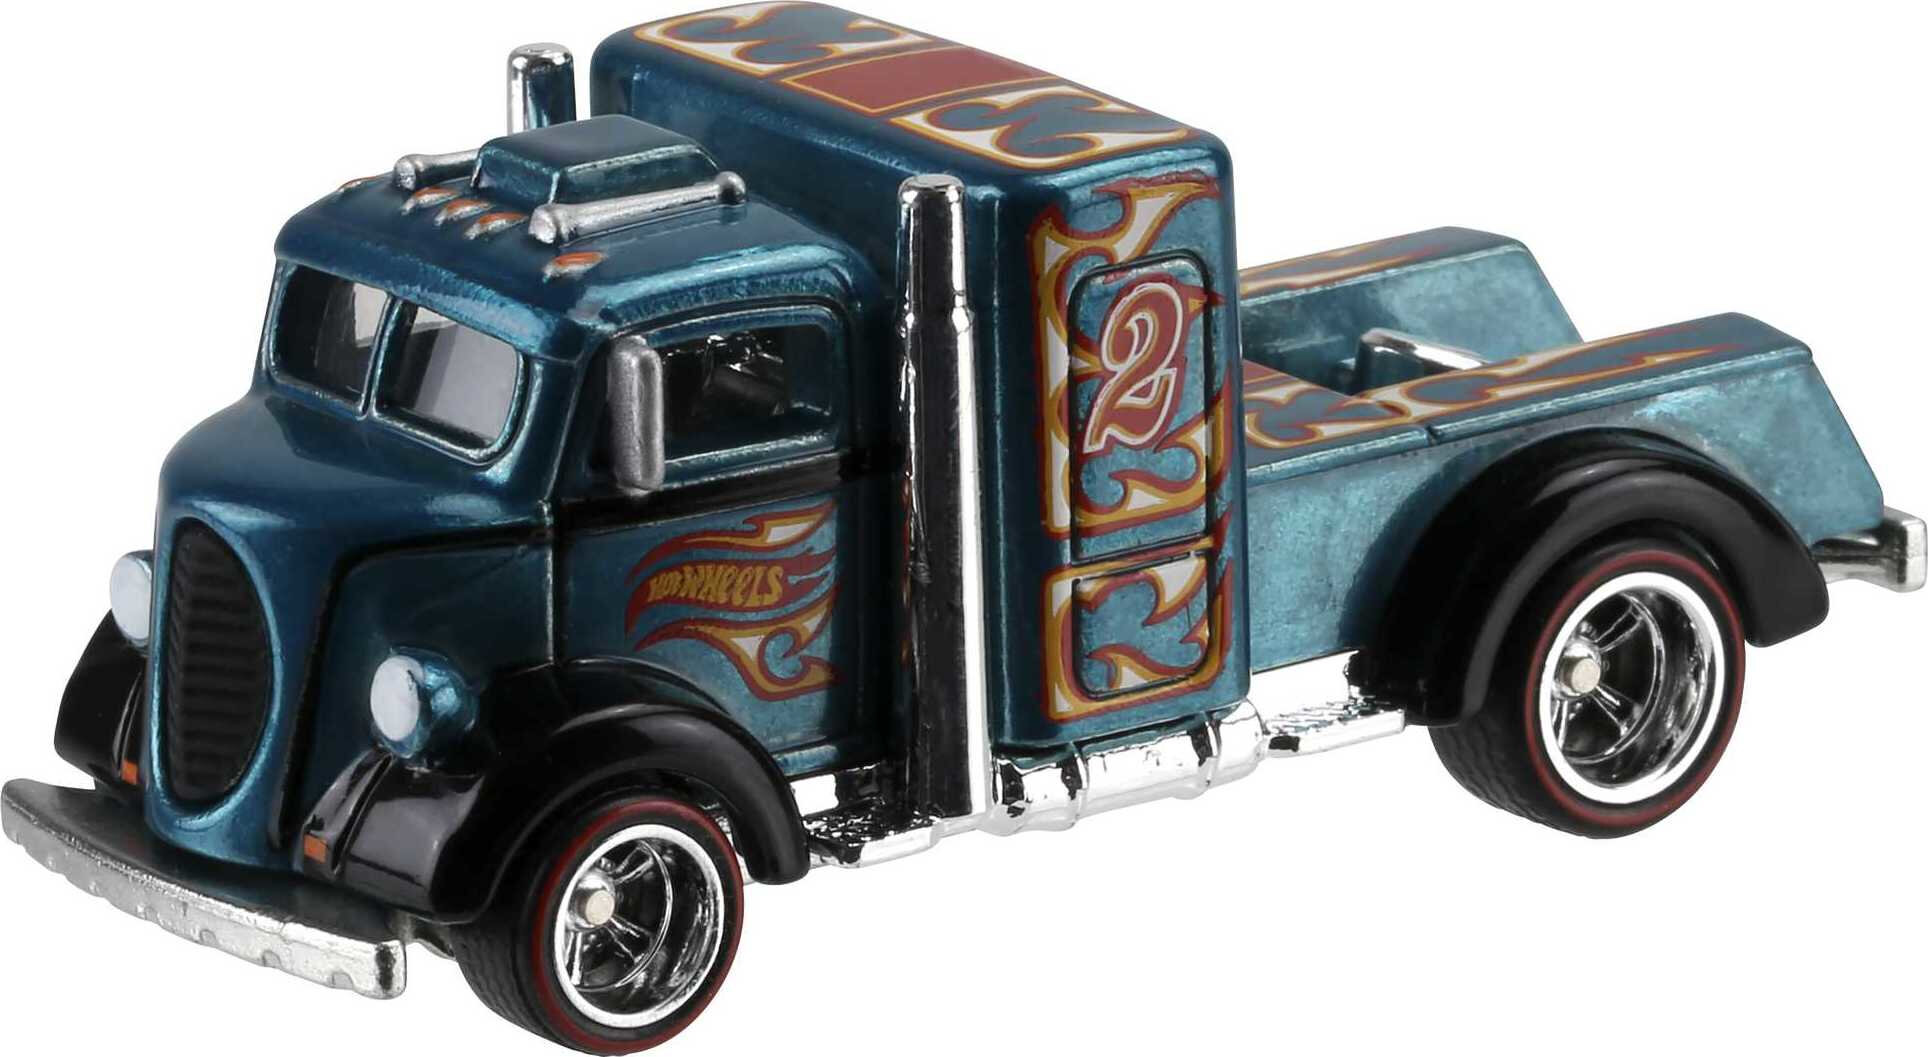 Hot Wheels Custom '38 Ford COE, Die-Cast Collectible Toy Car in 1:64 Scale - image 1 of 4